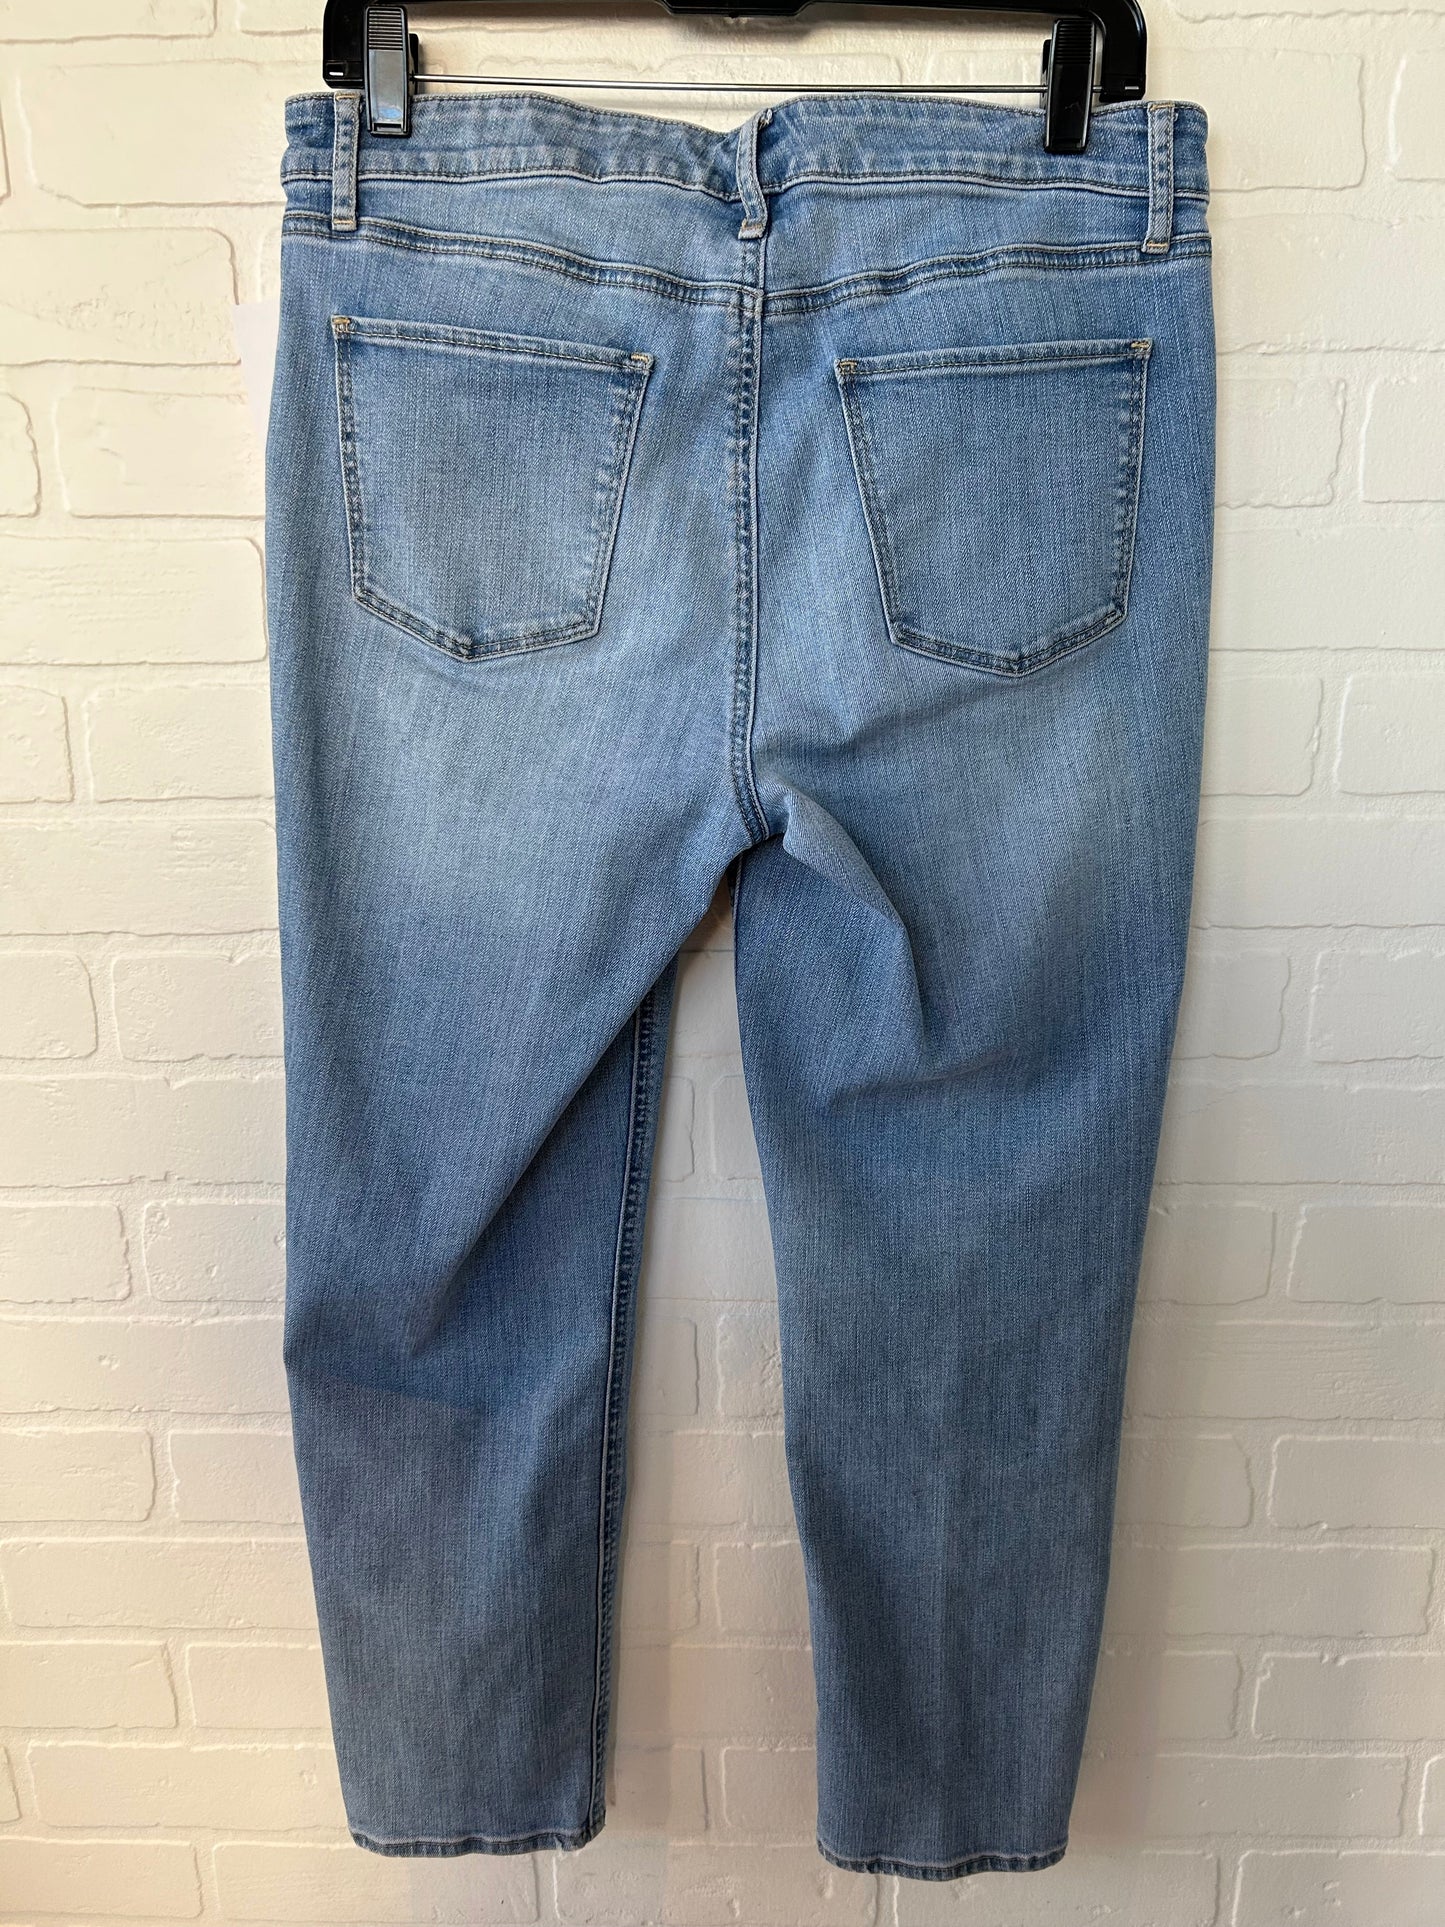 Jeans Straight By Talbots  Size: 12petite